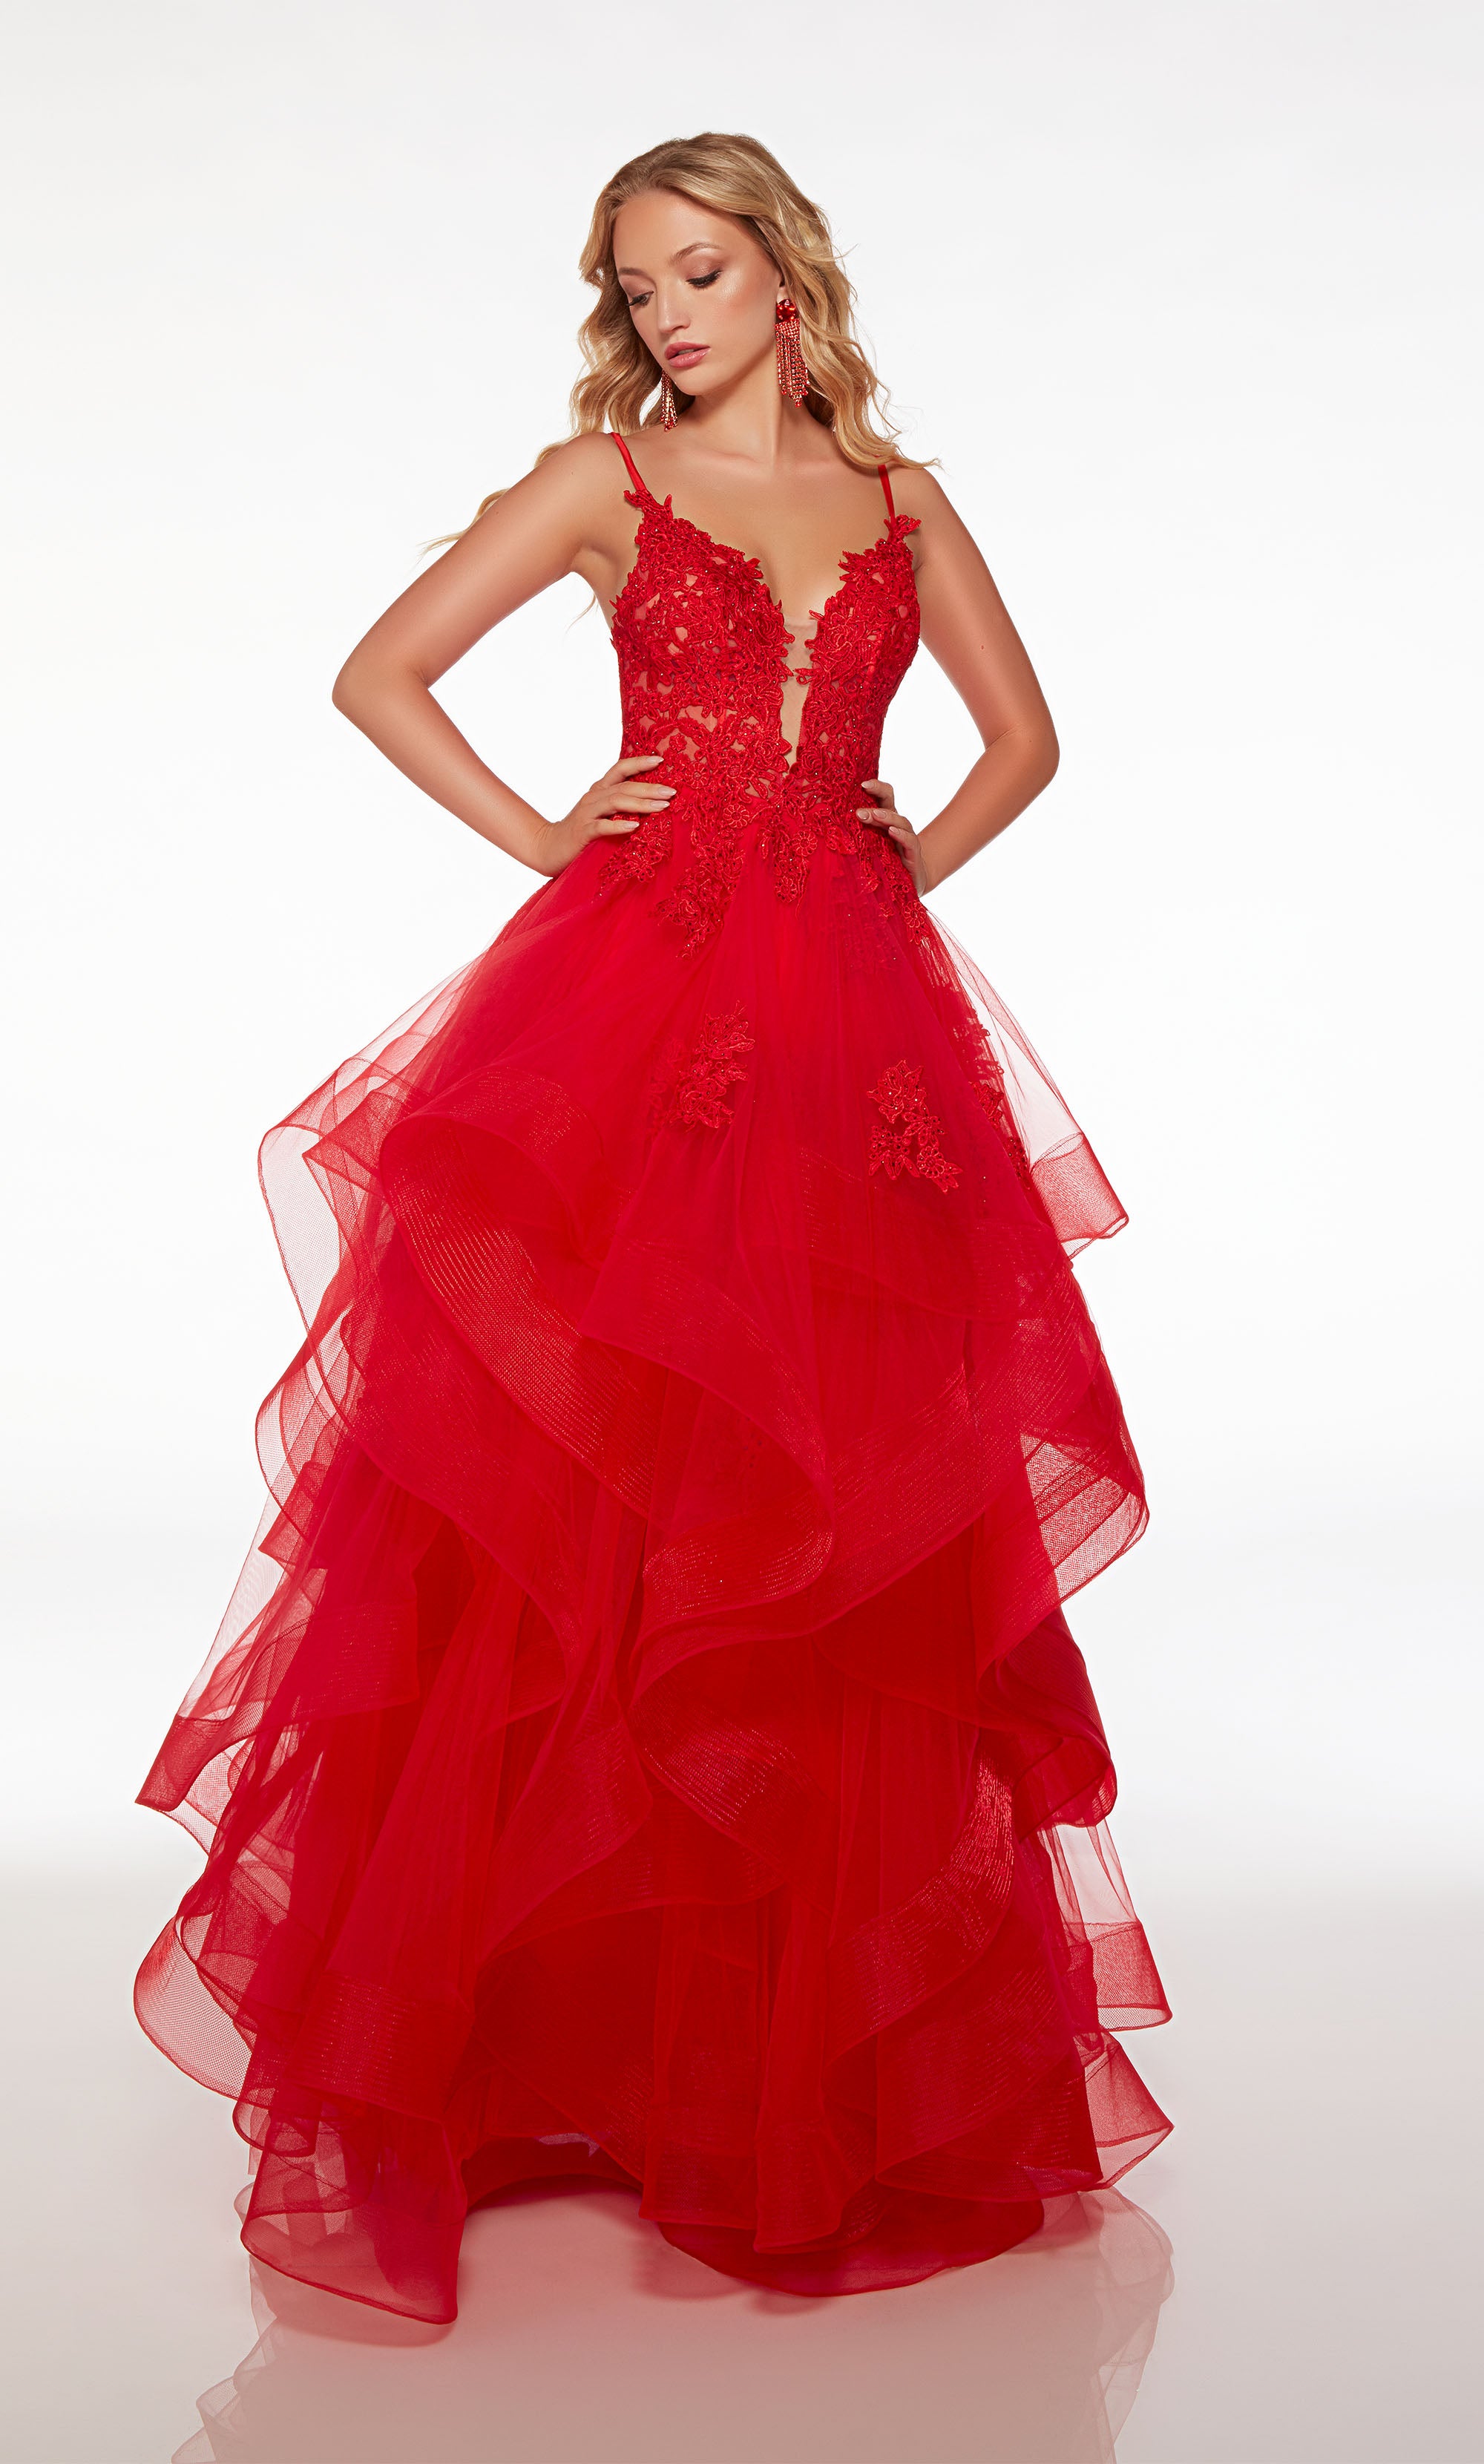 Charming Red Satin Ball Gown Party Dress, Red Prom Dress · BeMyBridesmaid ·  Online Store Powered by Storenvy